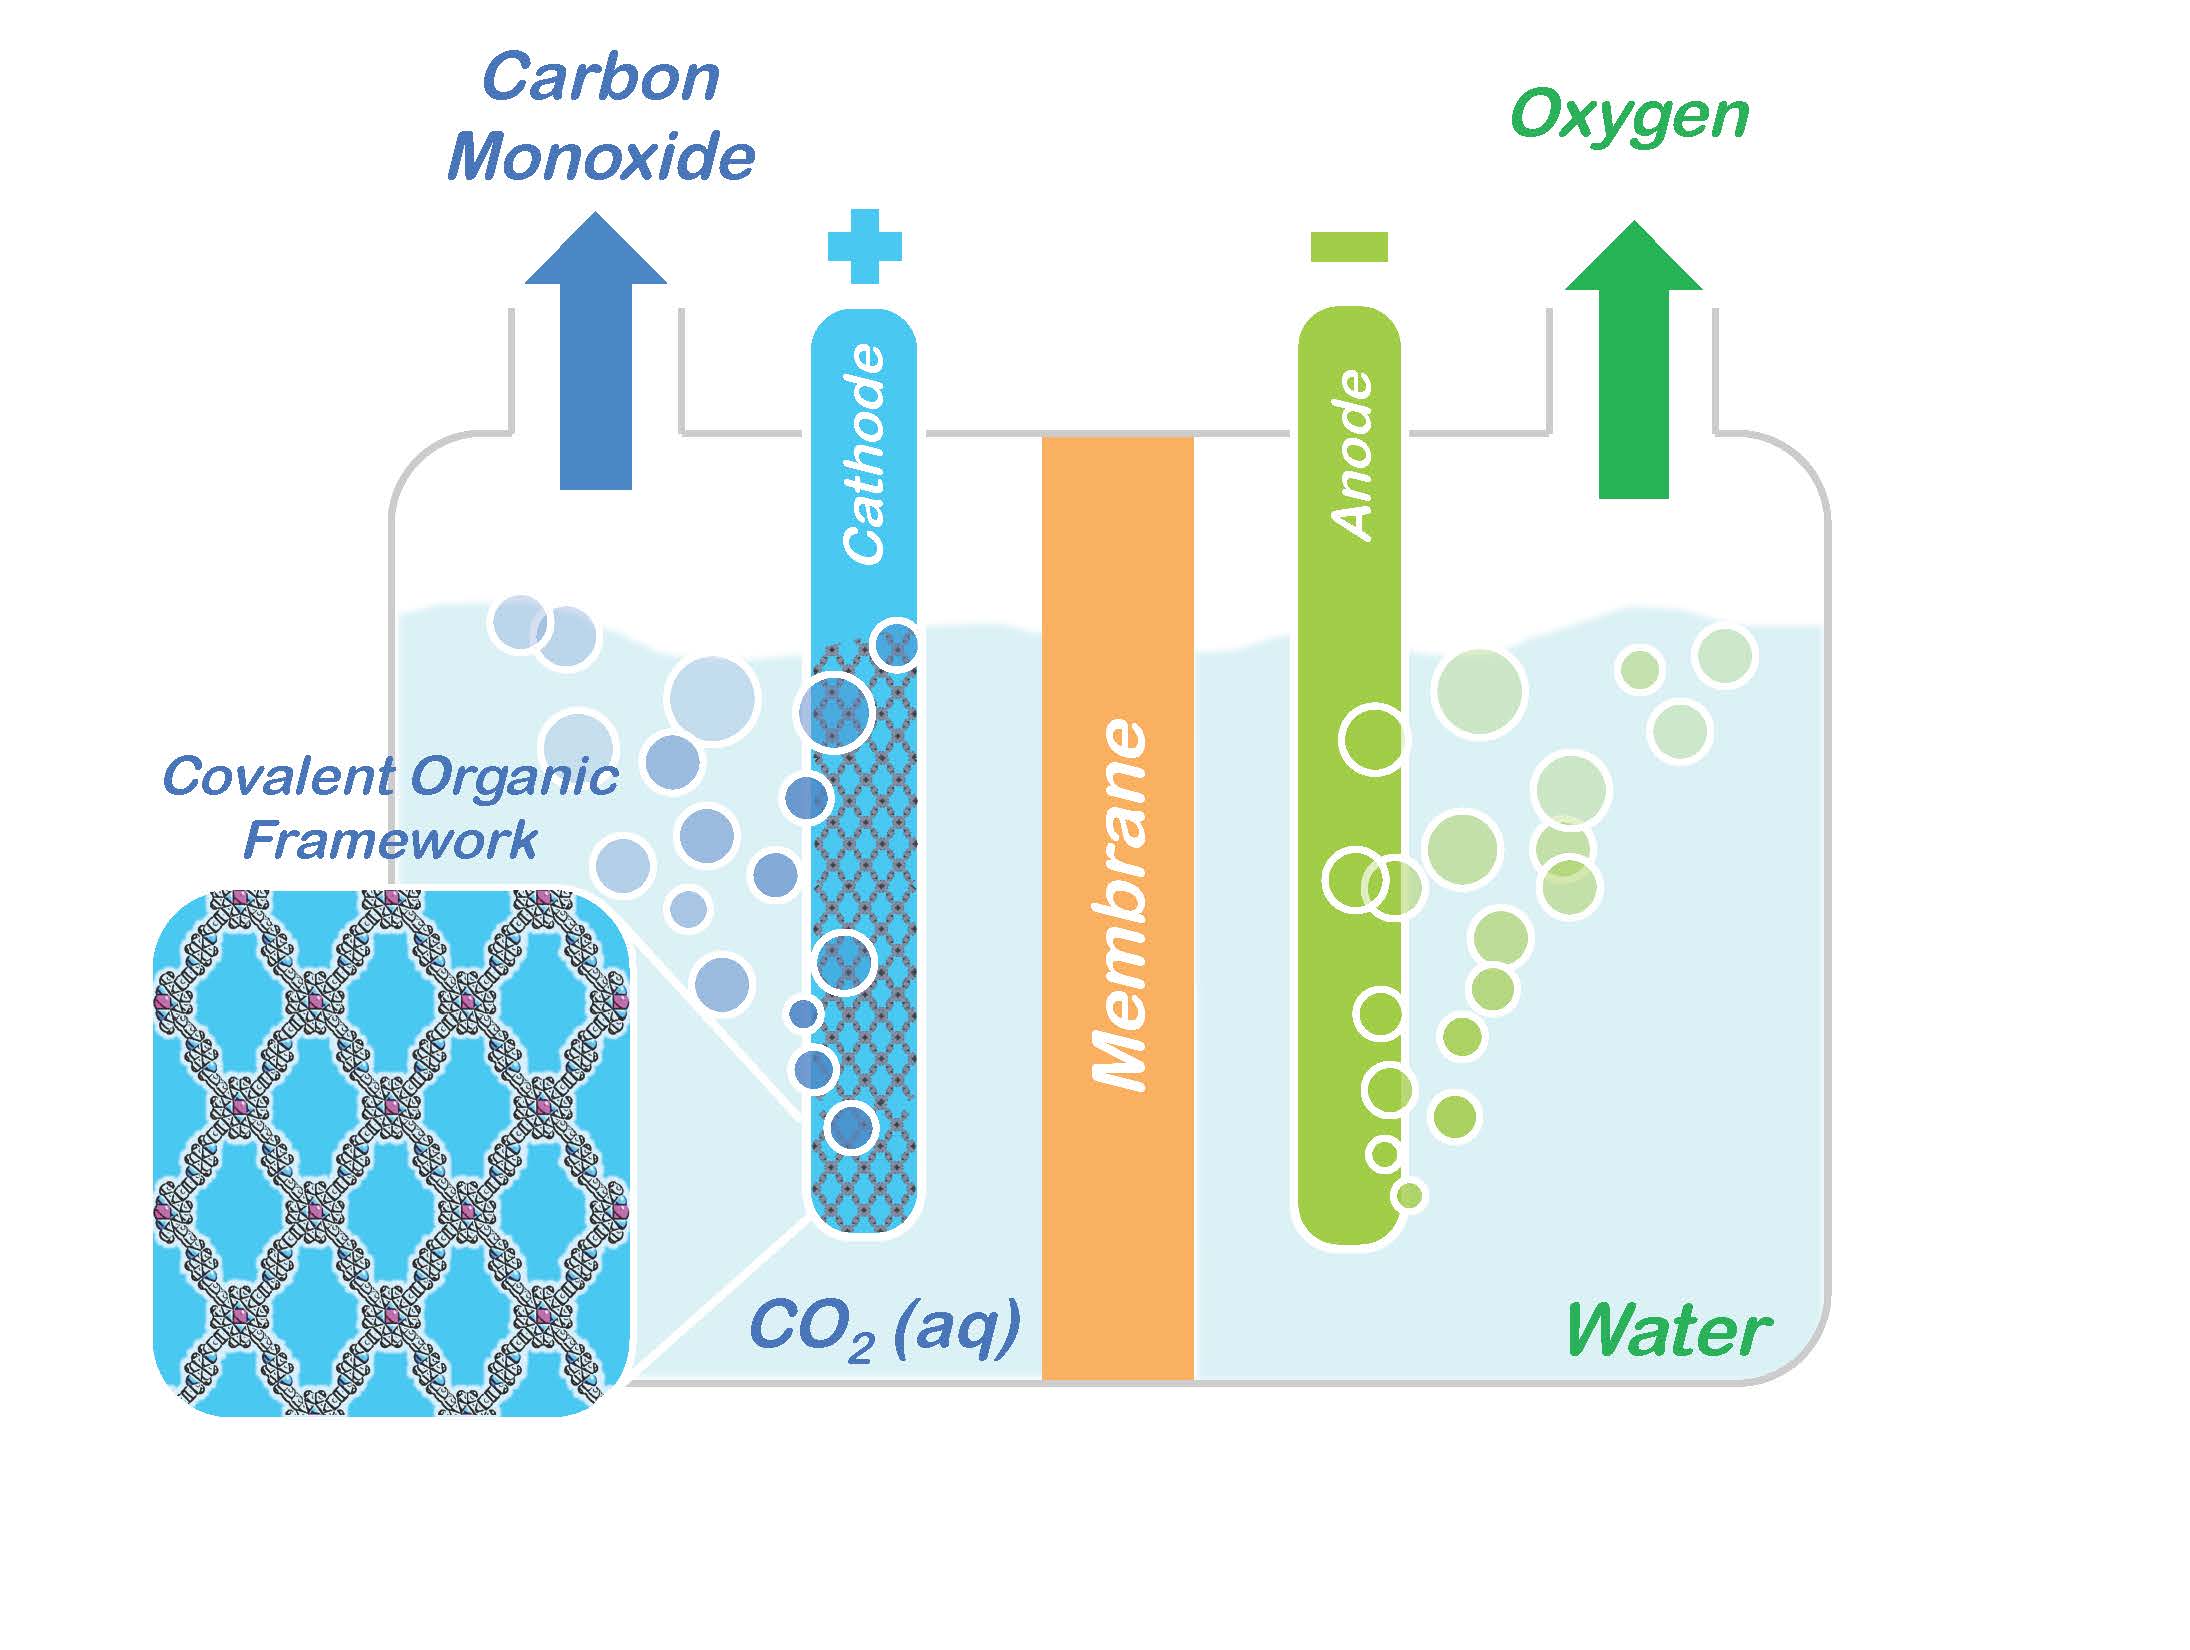 Carbon Dioxide: Another promising approach from problem to product